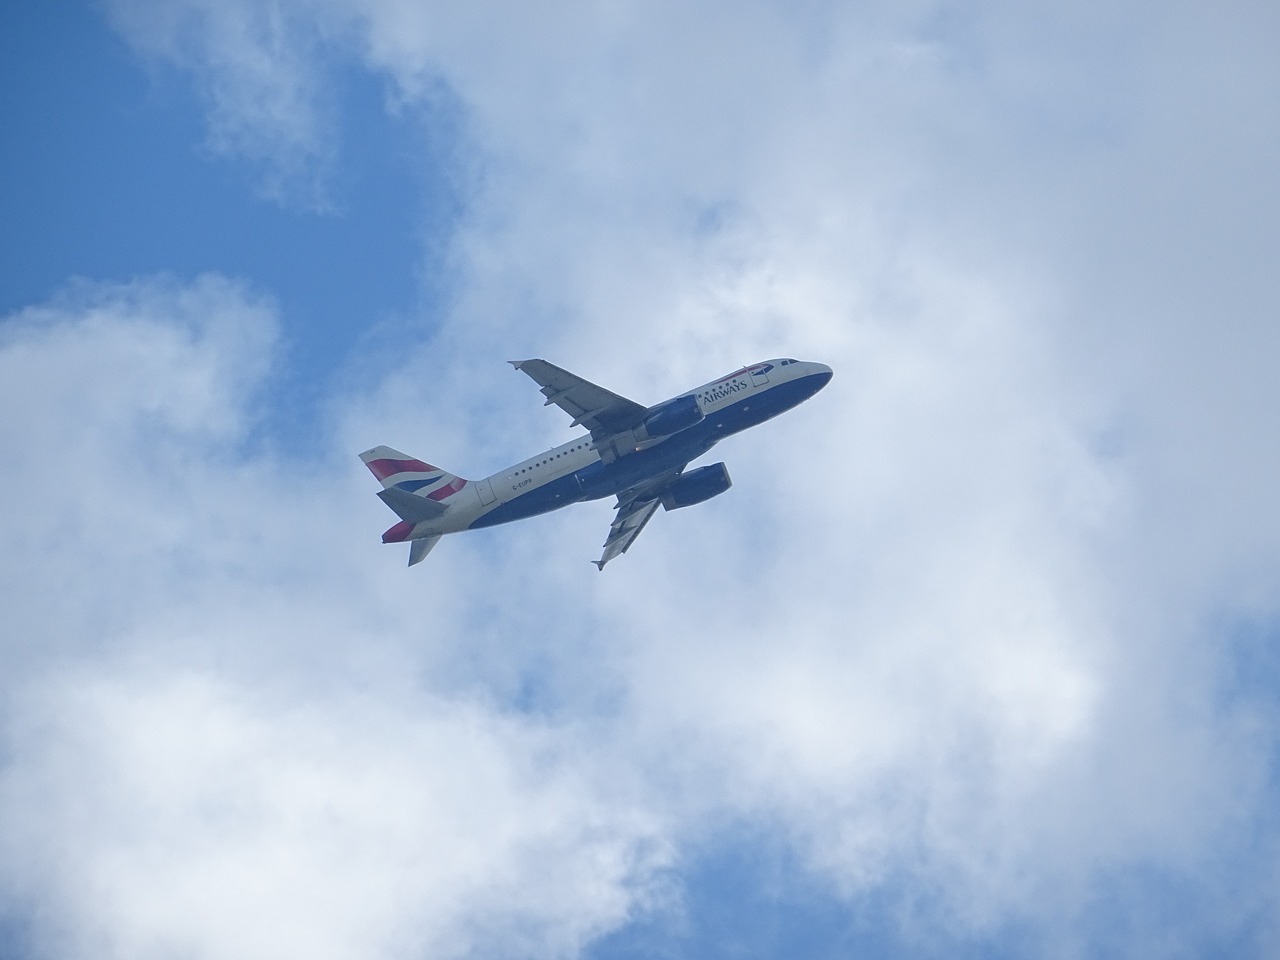 BA breaks record on fastest subsonic flight from New York to London